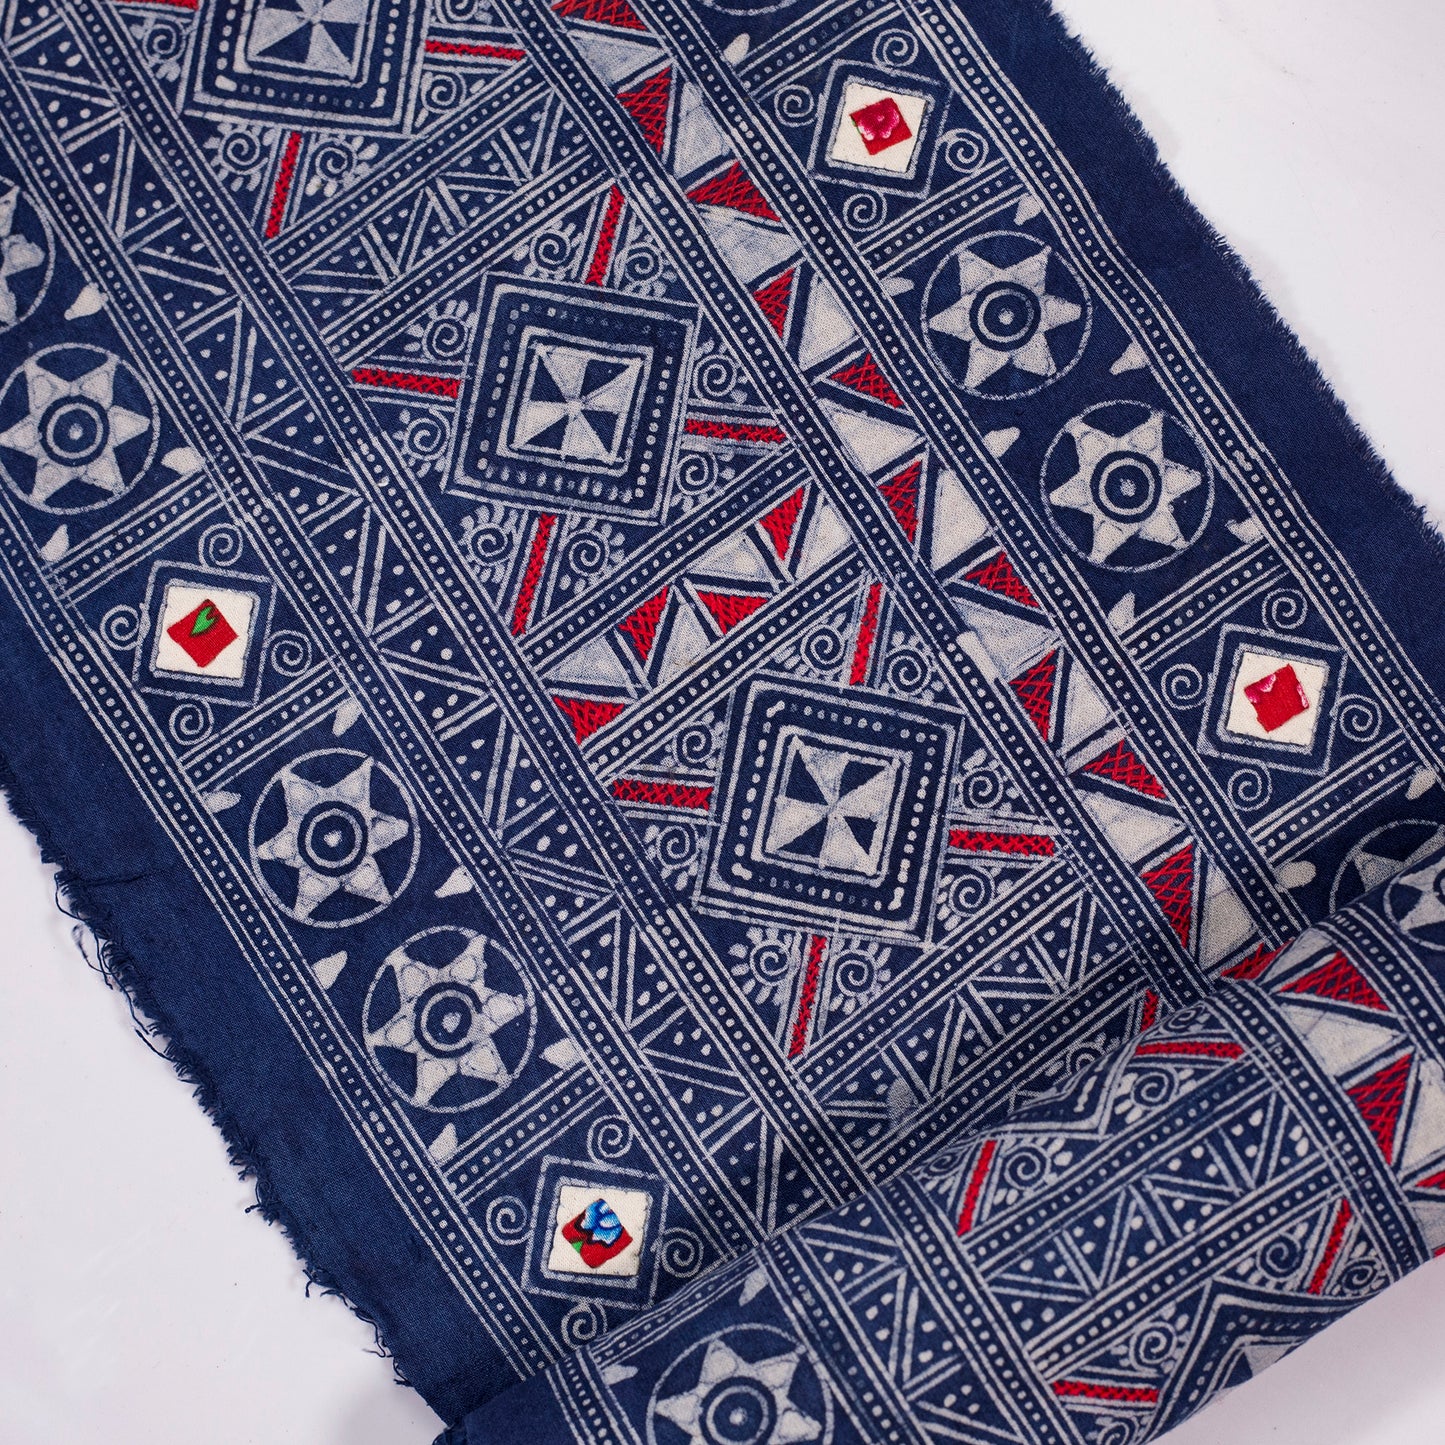 Handcrafted H'mong Batik Fabric – Organic Indigo and Beeswax Patterns in Cotton